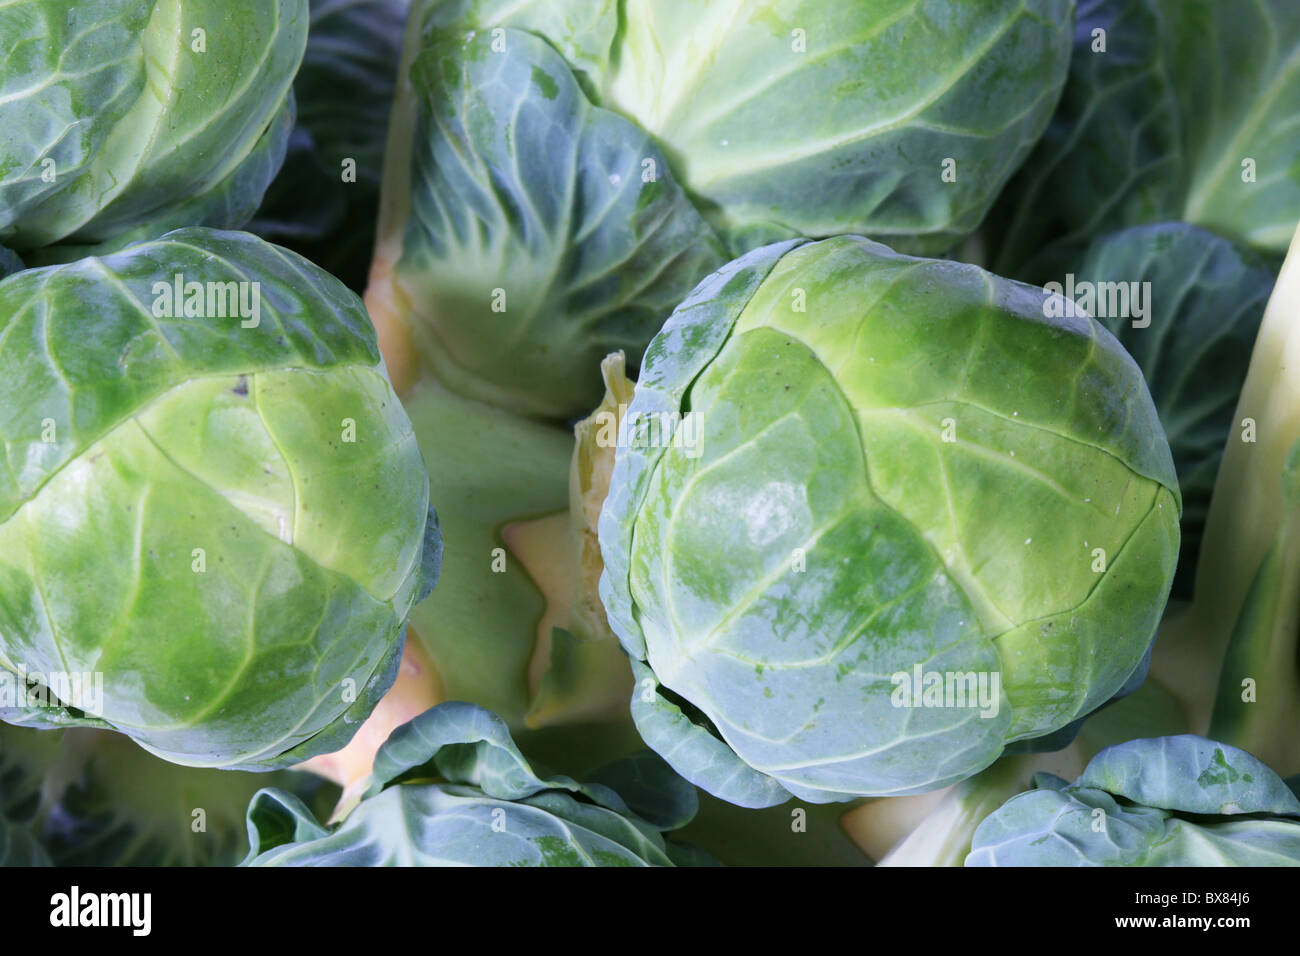 macro of a stalk of brussels sprouts Stock Photo